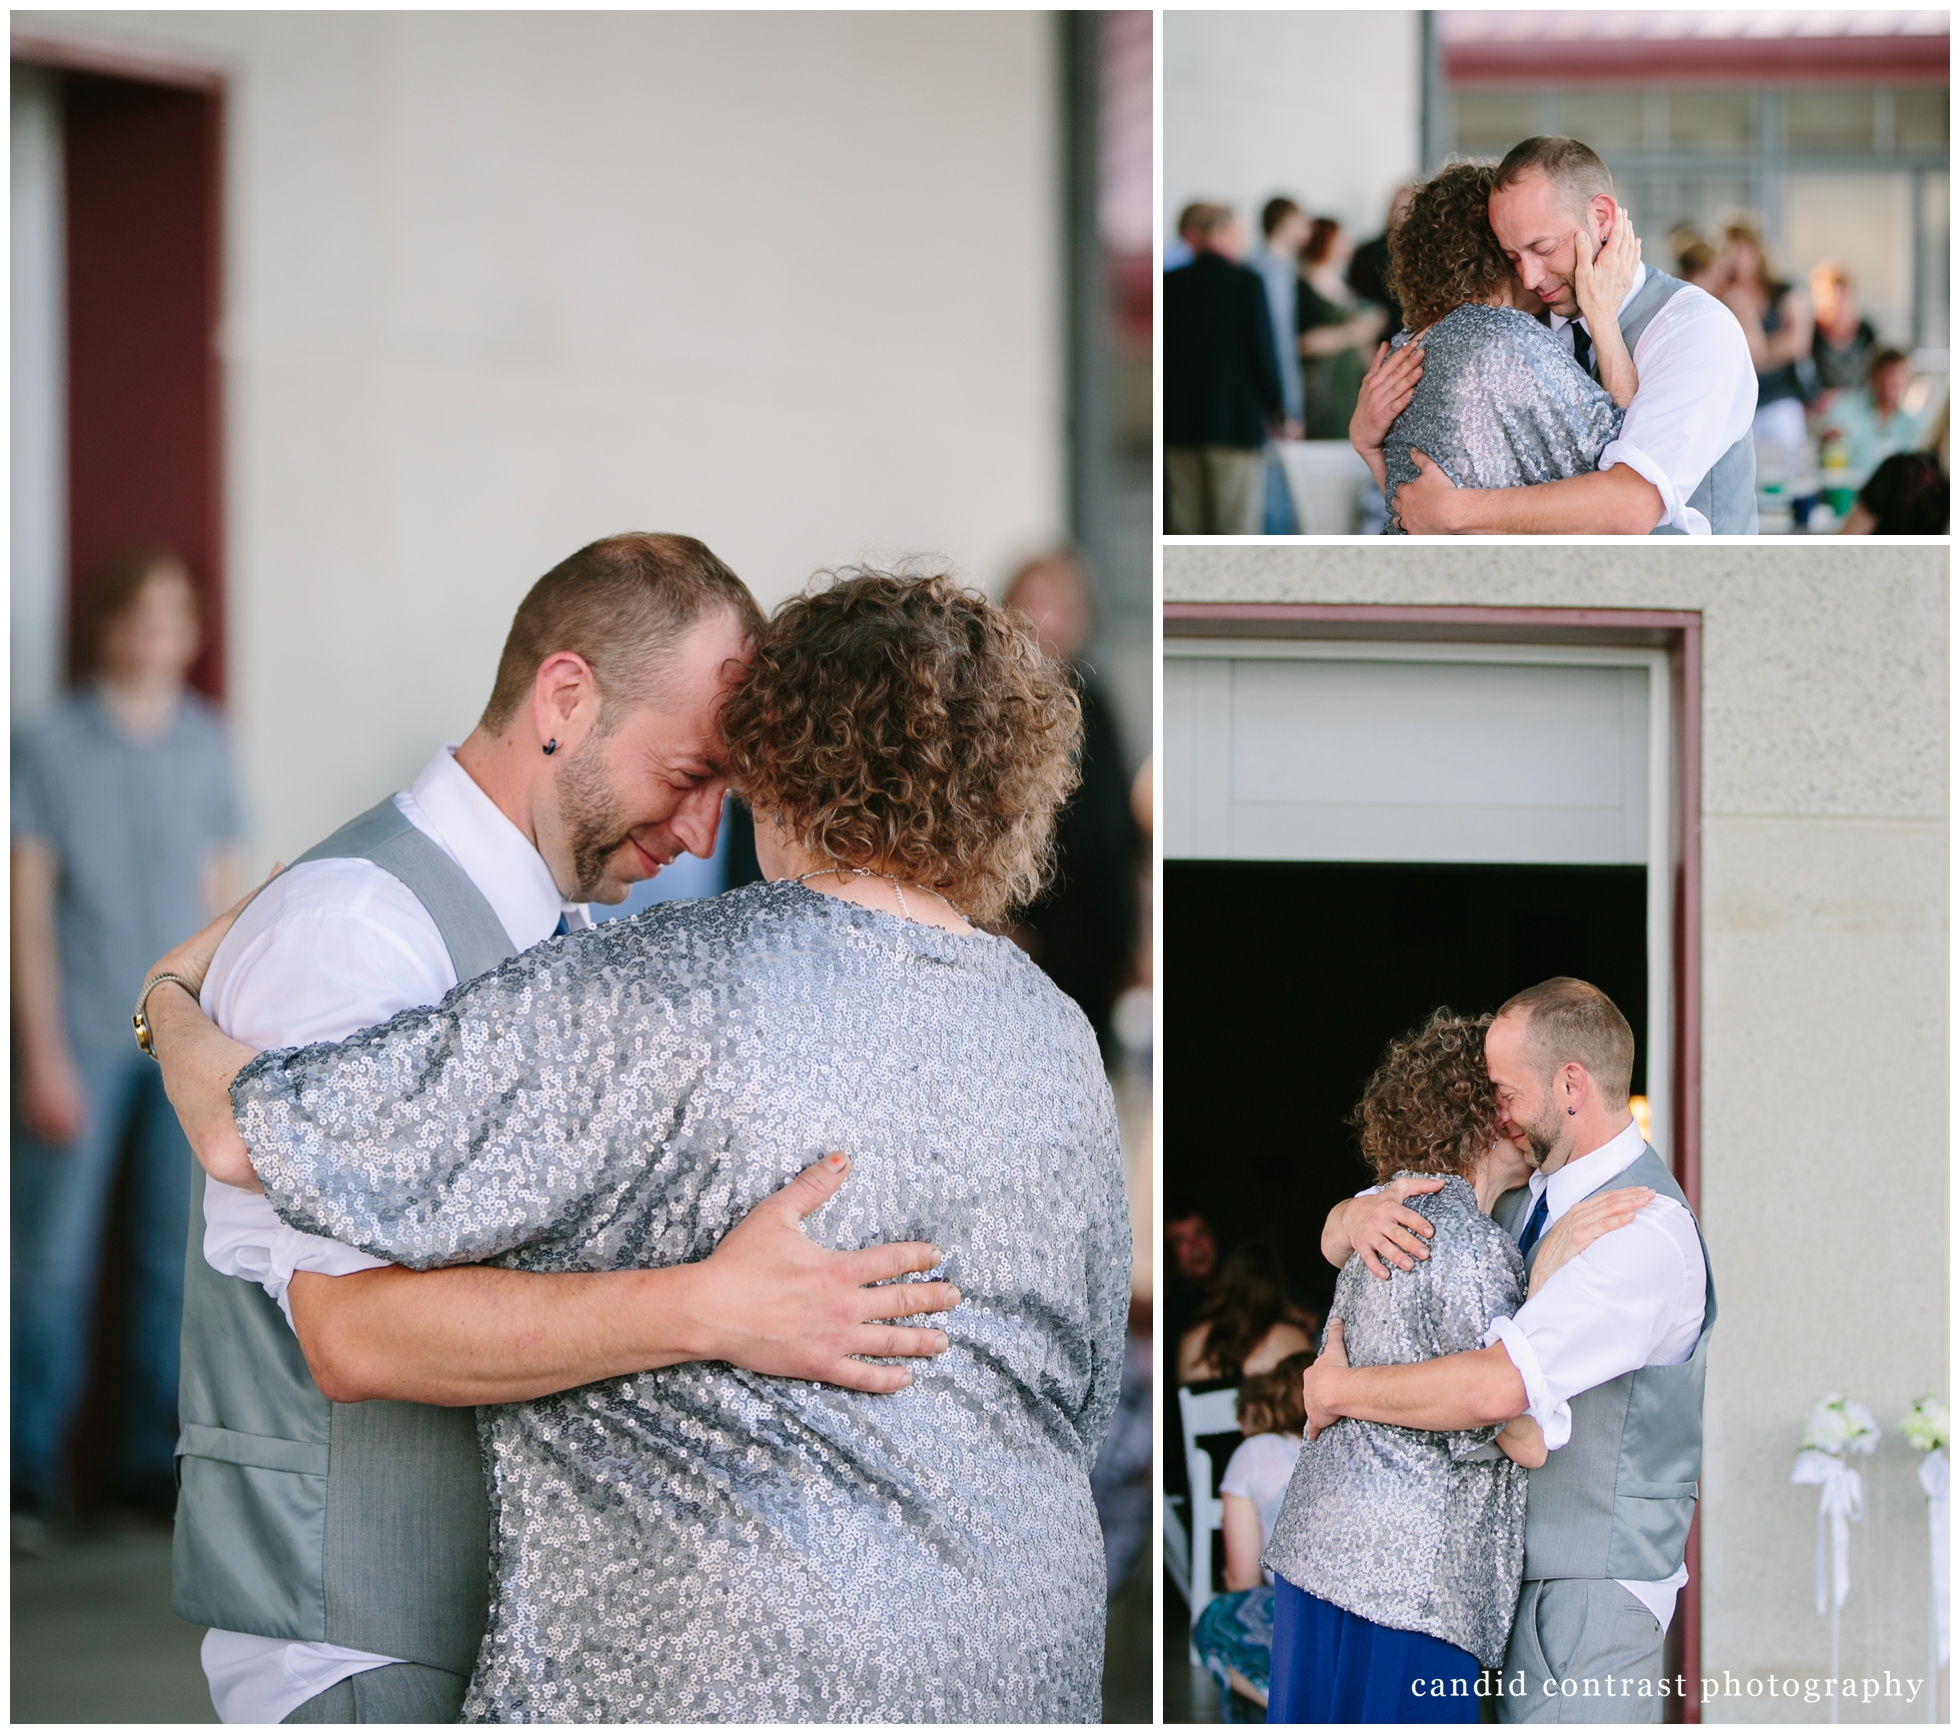 mother son dance at a bellevue iowa outdoor wedding at the shore event center, iowa wedding photographer candid contrast photography